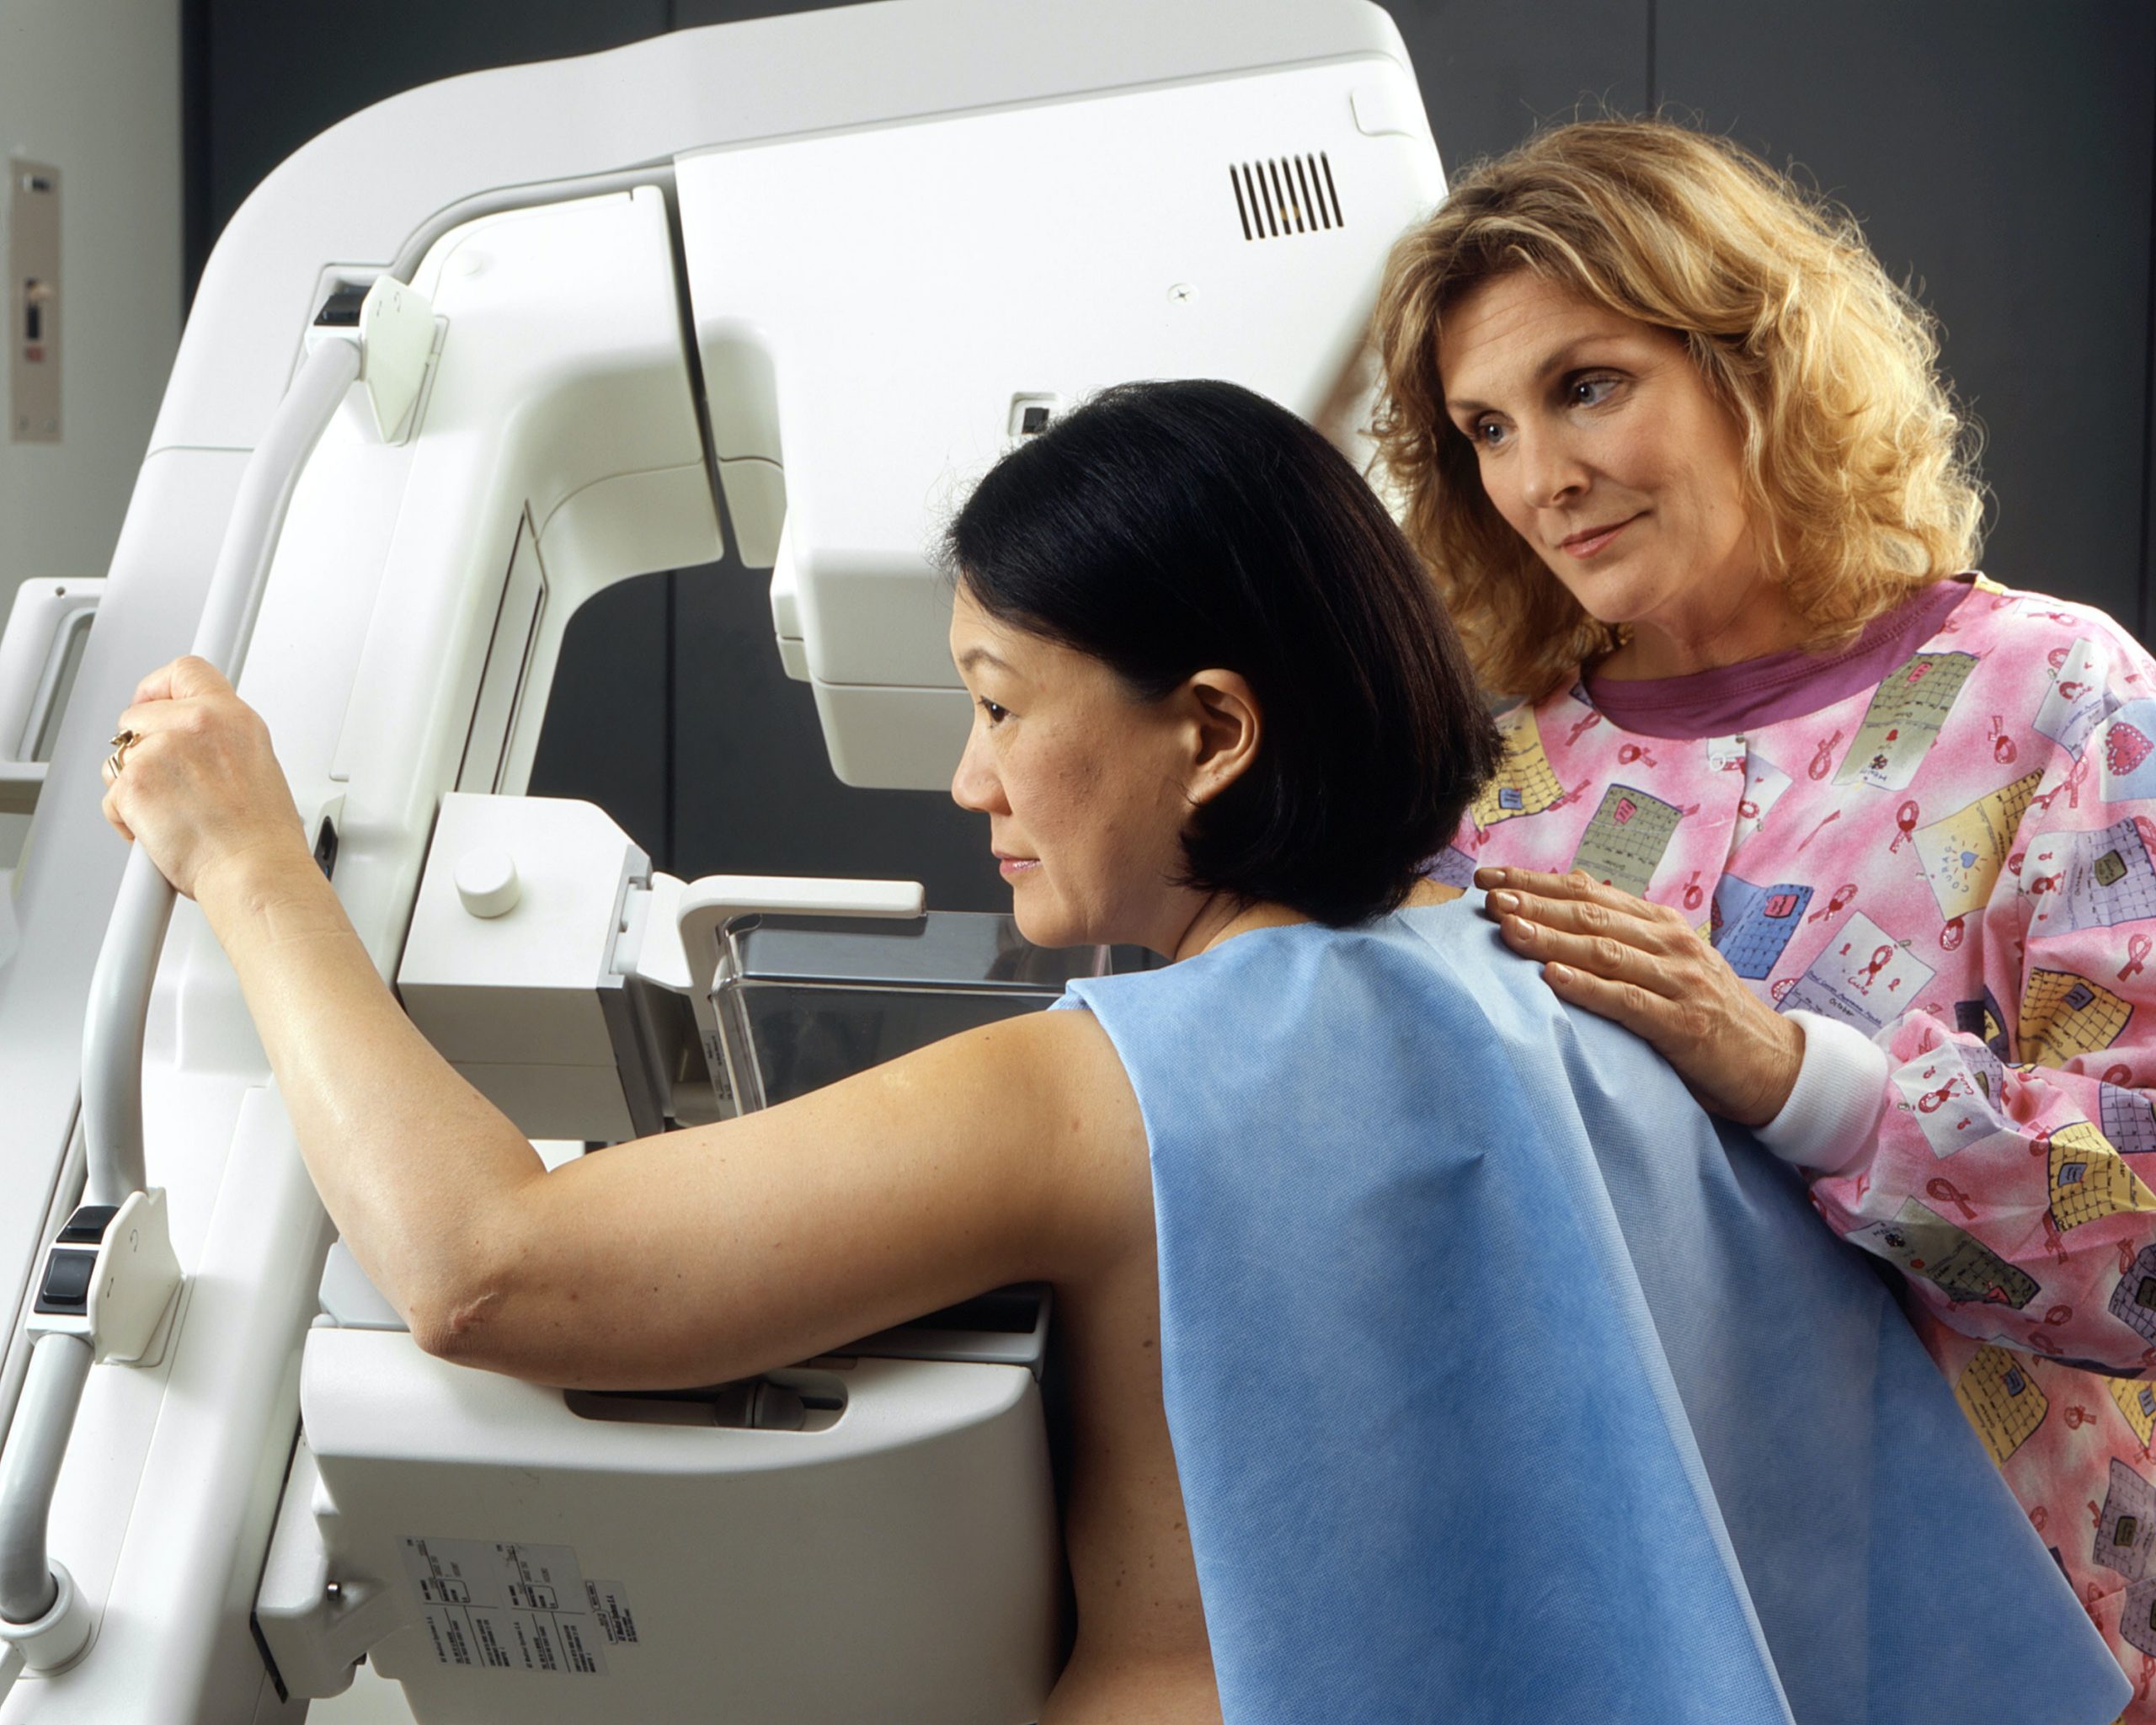 An Asian woman is having a mammogram, supported by a white female medical professional